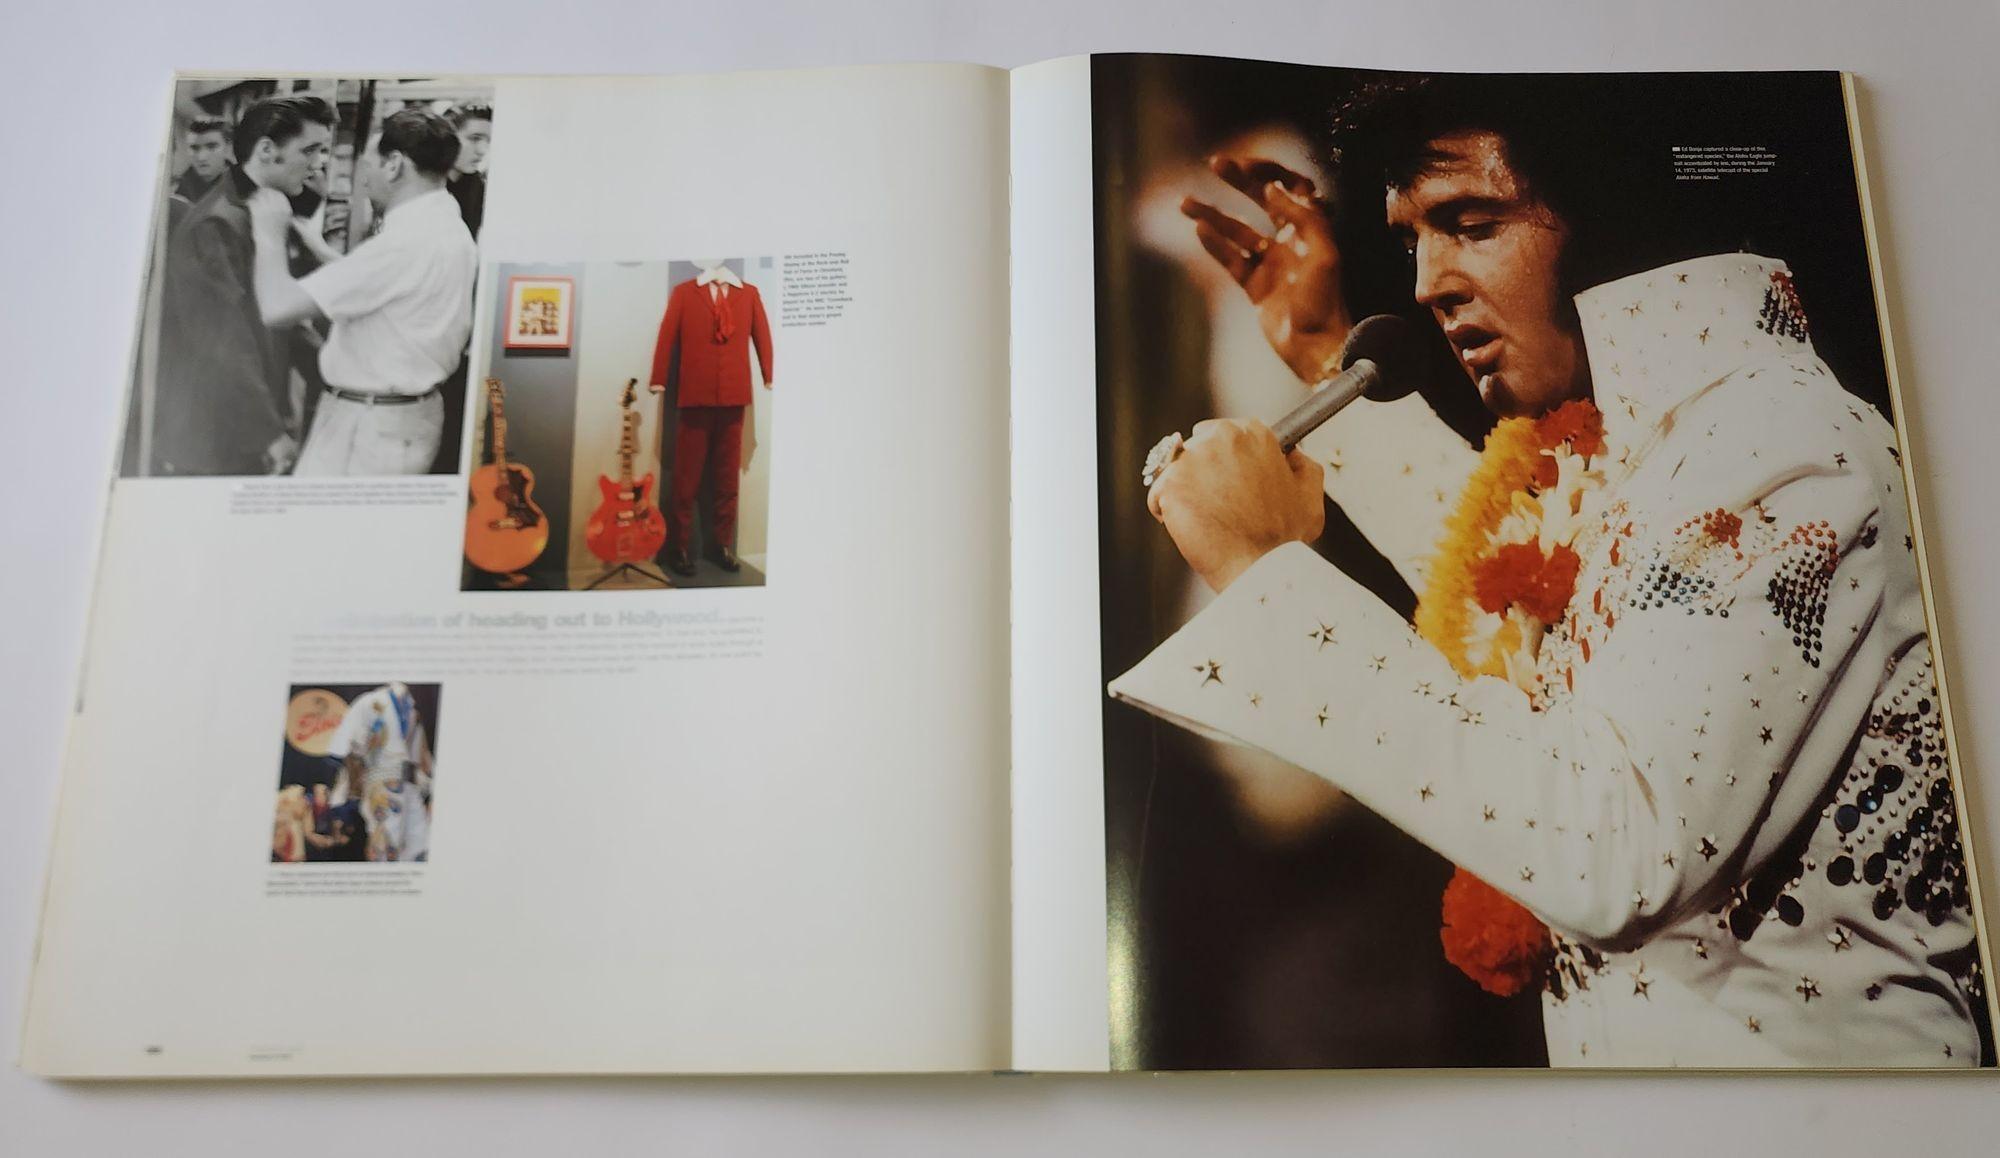 The King by Jim Piazza Elvis Presley - Large size coffee table book For Sale 2